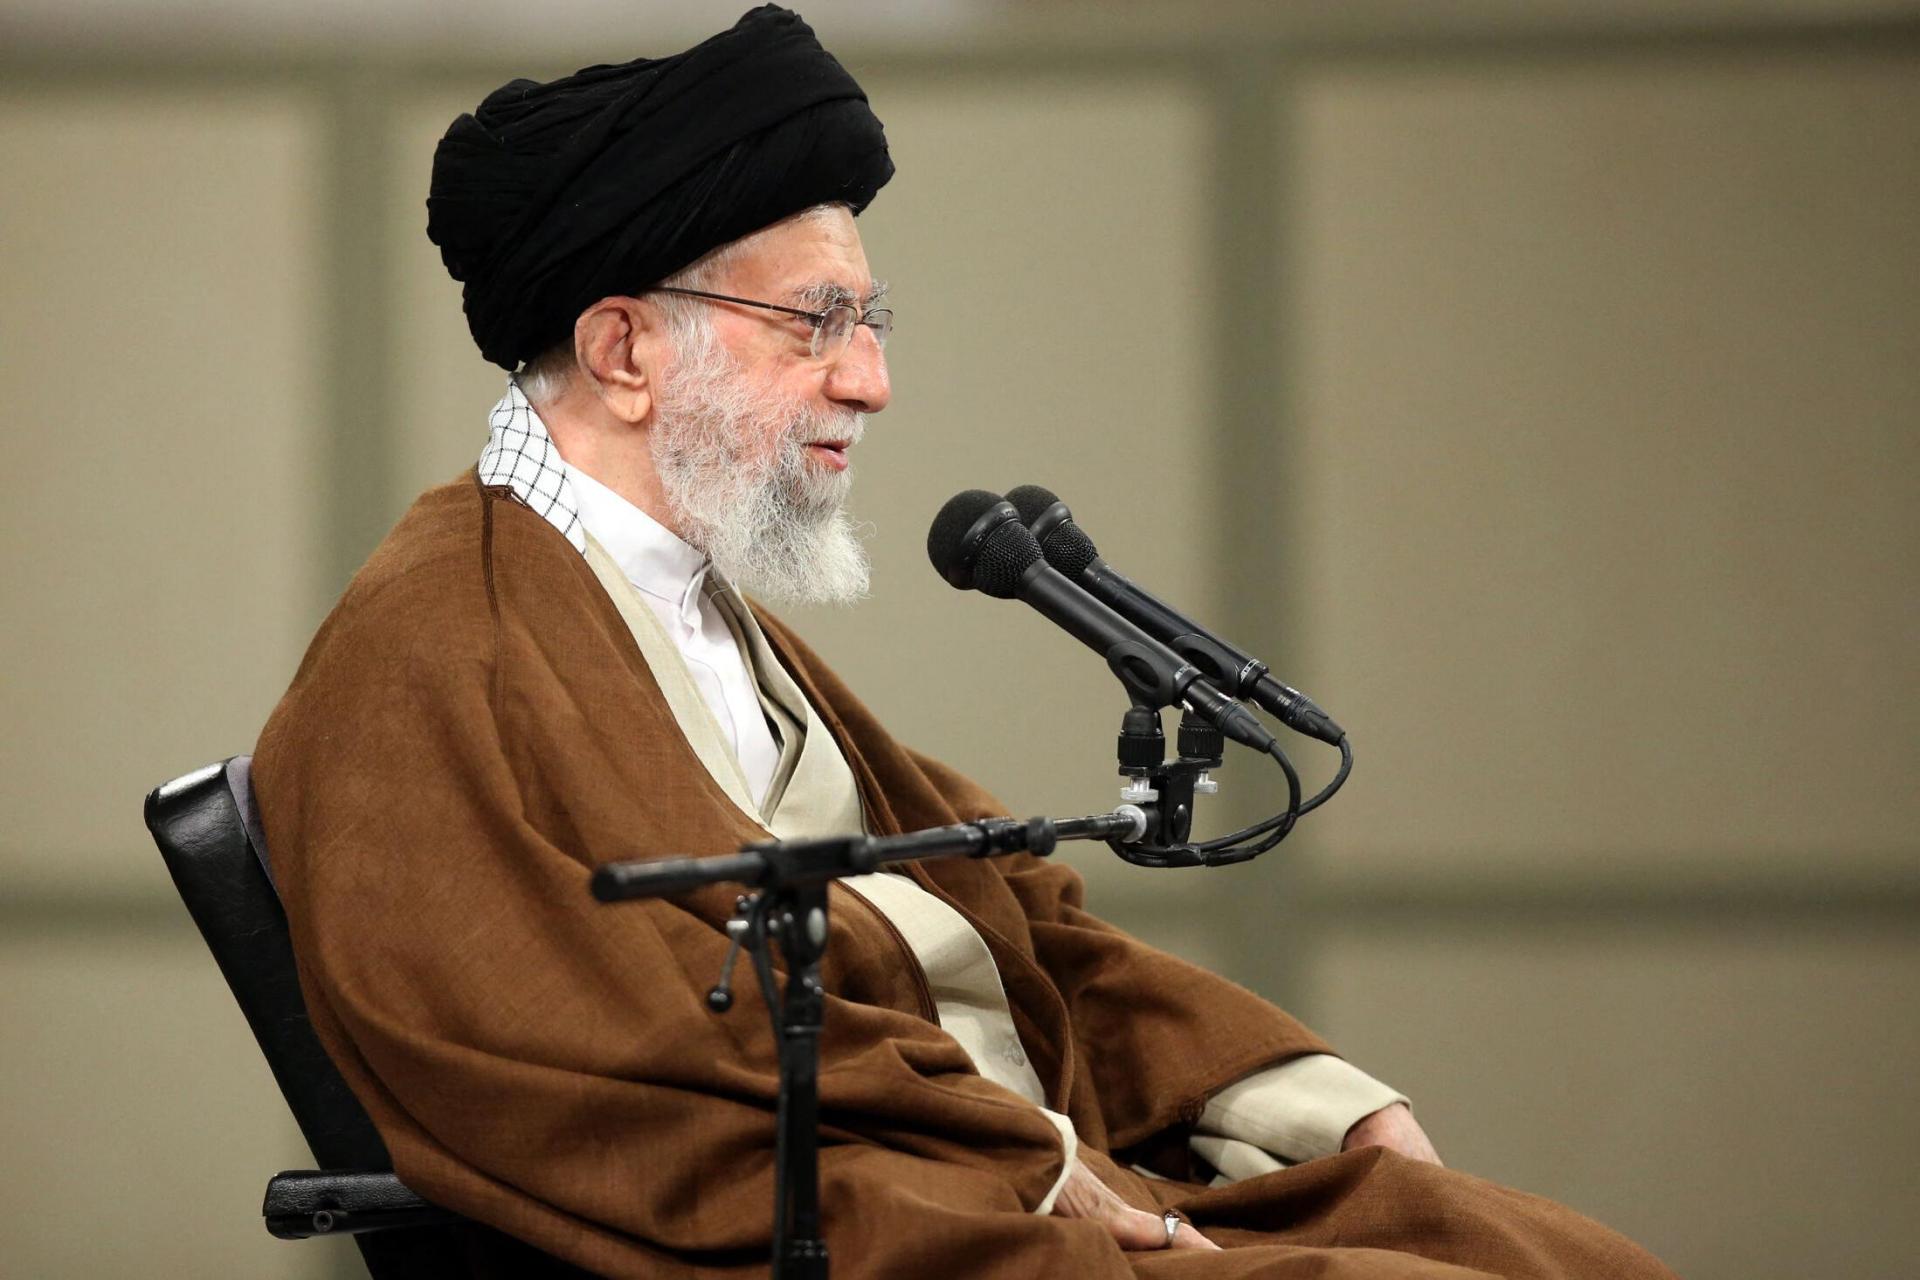 ‘I oppose my brother’s actions,’ says sister of Iran’s Supreme Leader in letter